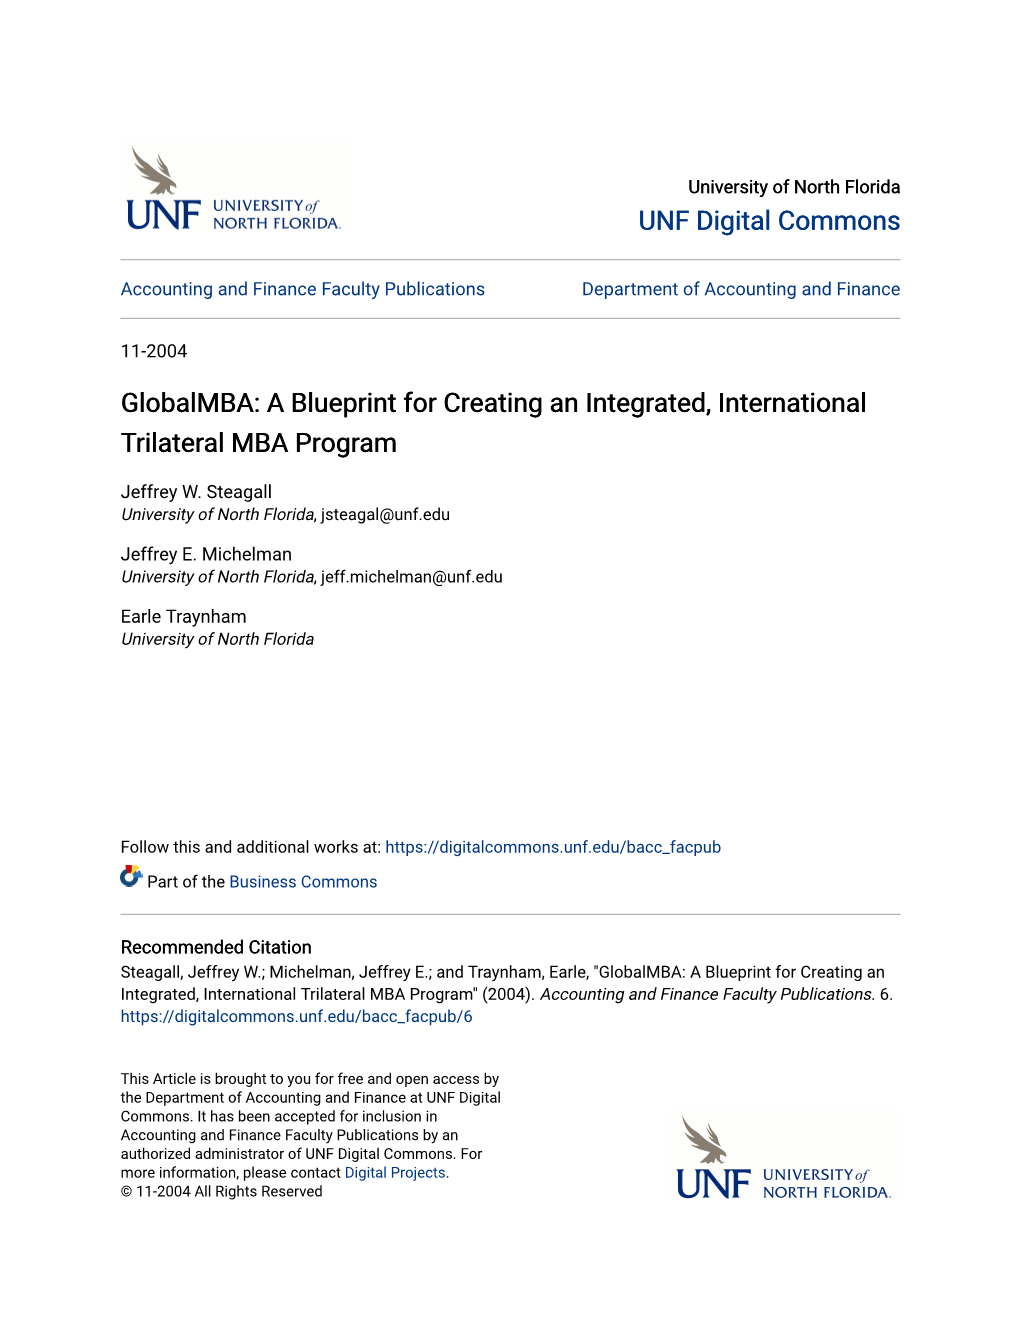 A Blueprint for Creating an Integrated, International Trilateral MBA Program